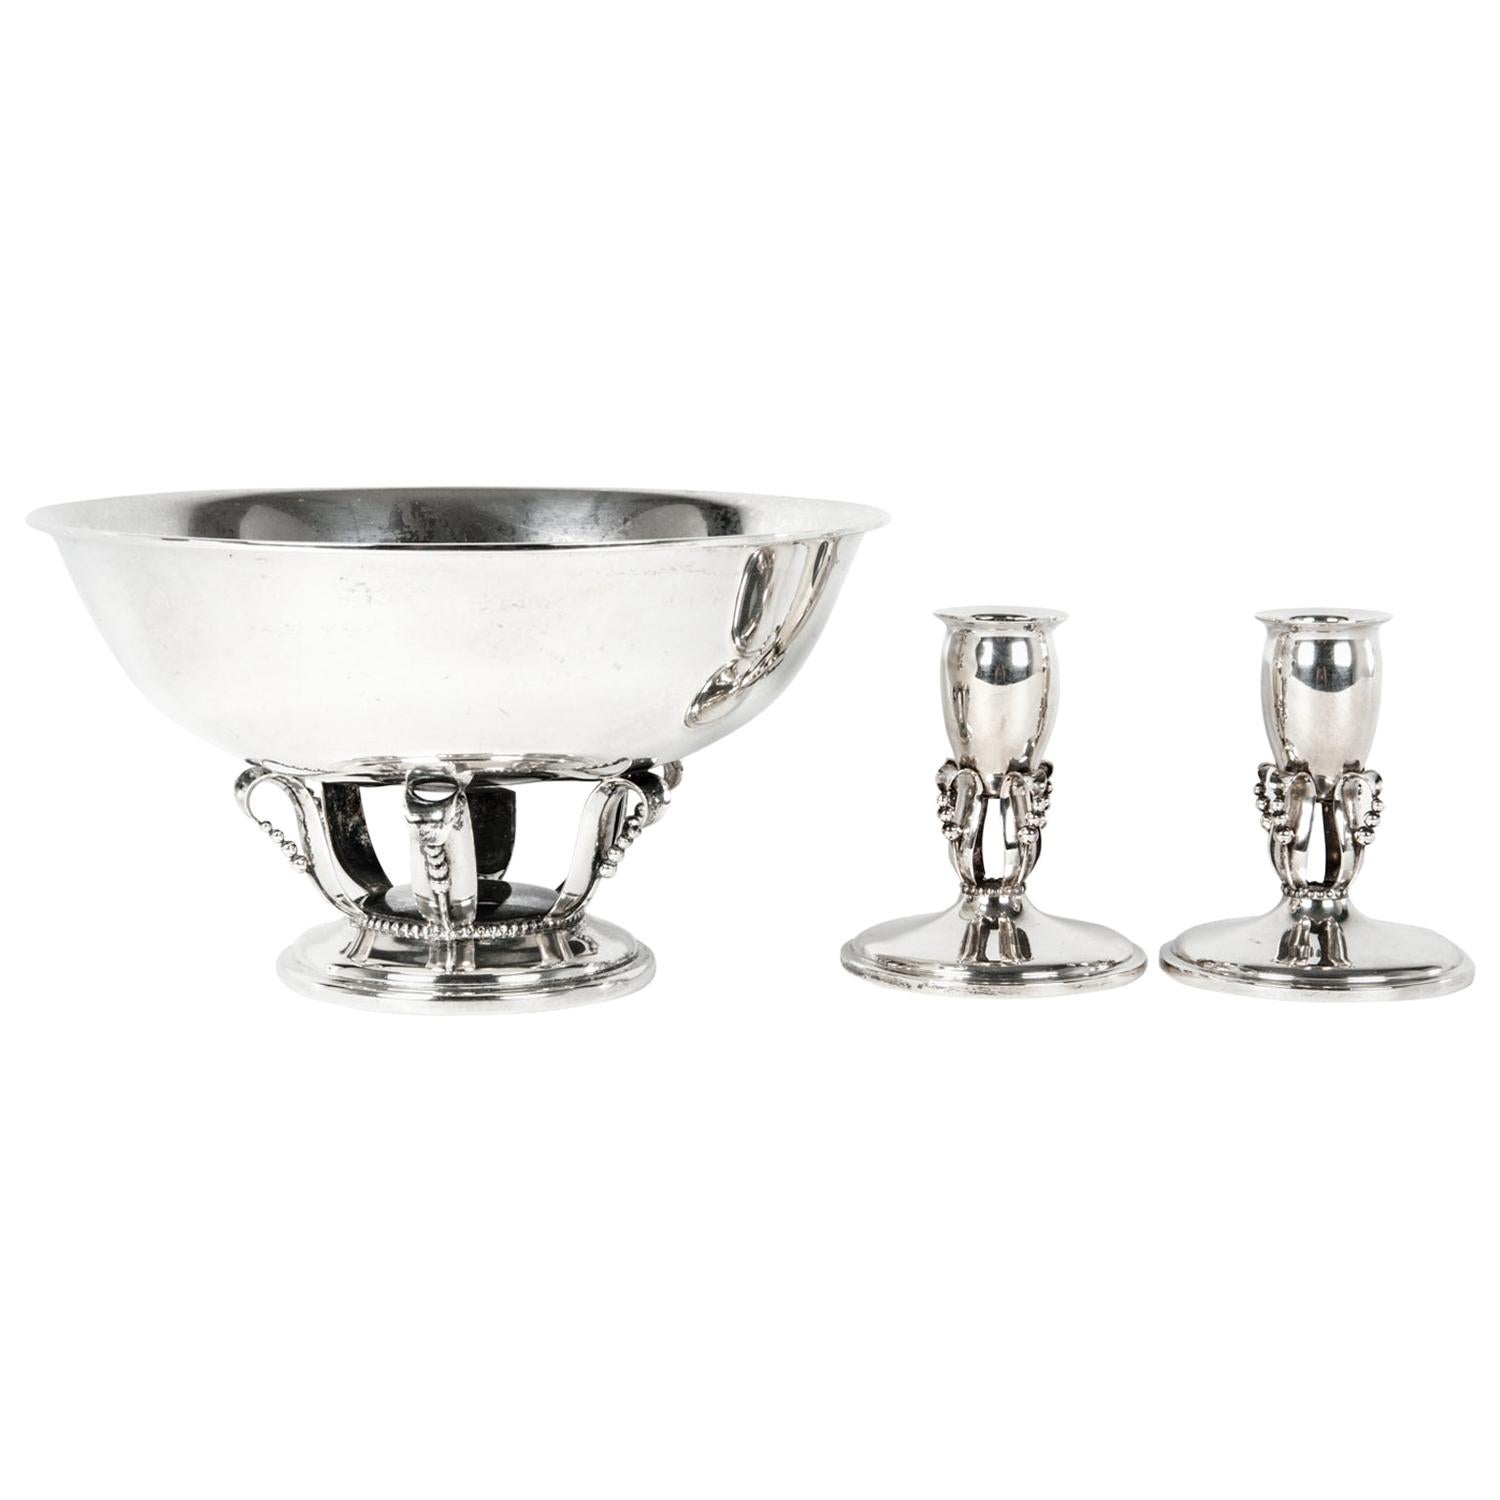 Sterling Silver Footed Center Piece Bowl / Two Candlesticks